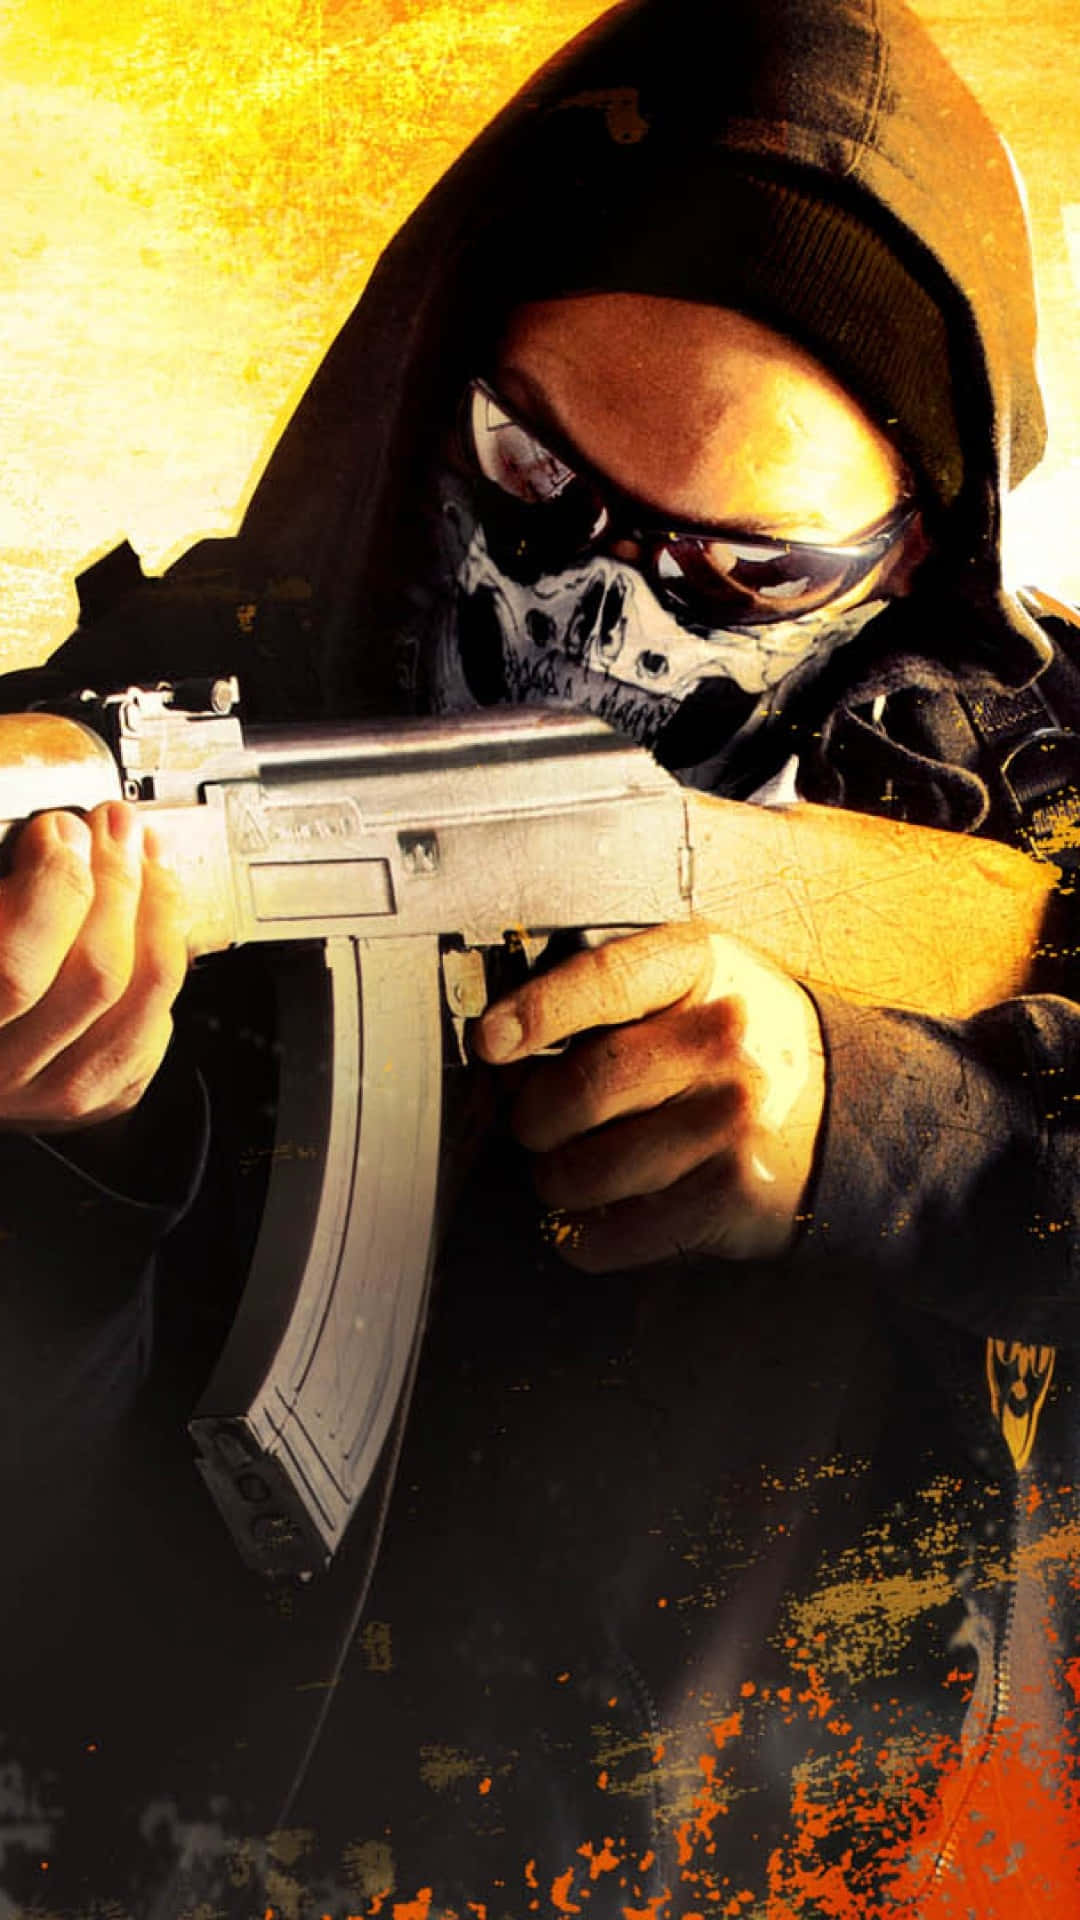 Android Counter-strike Global Offensive Terrorist With An AK47 Background